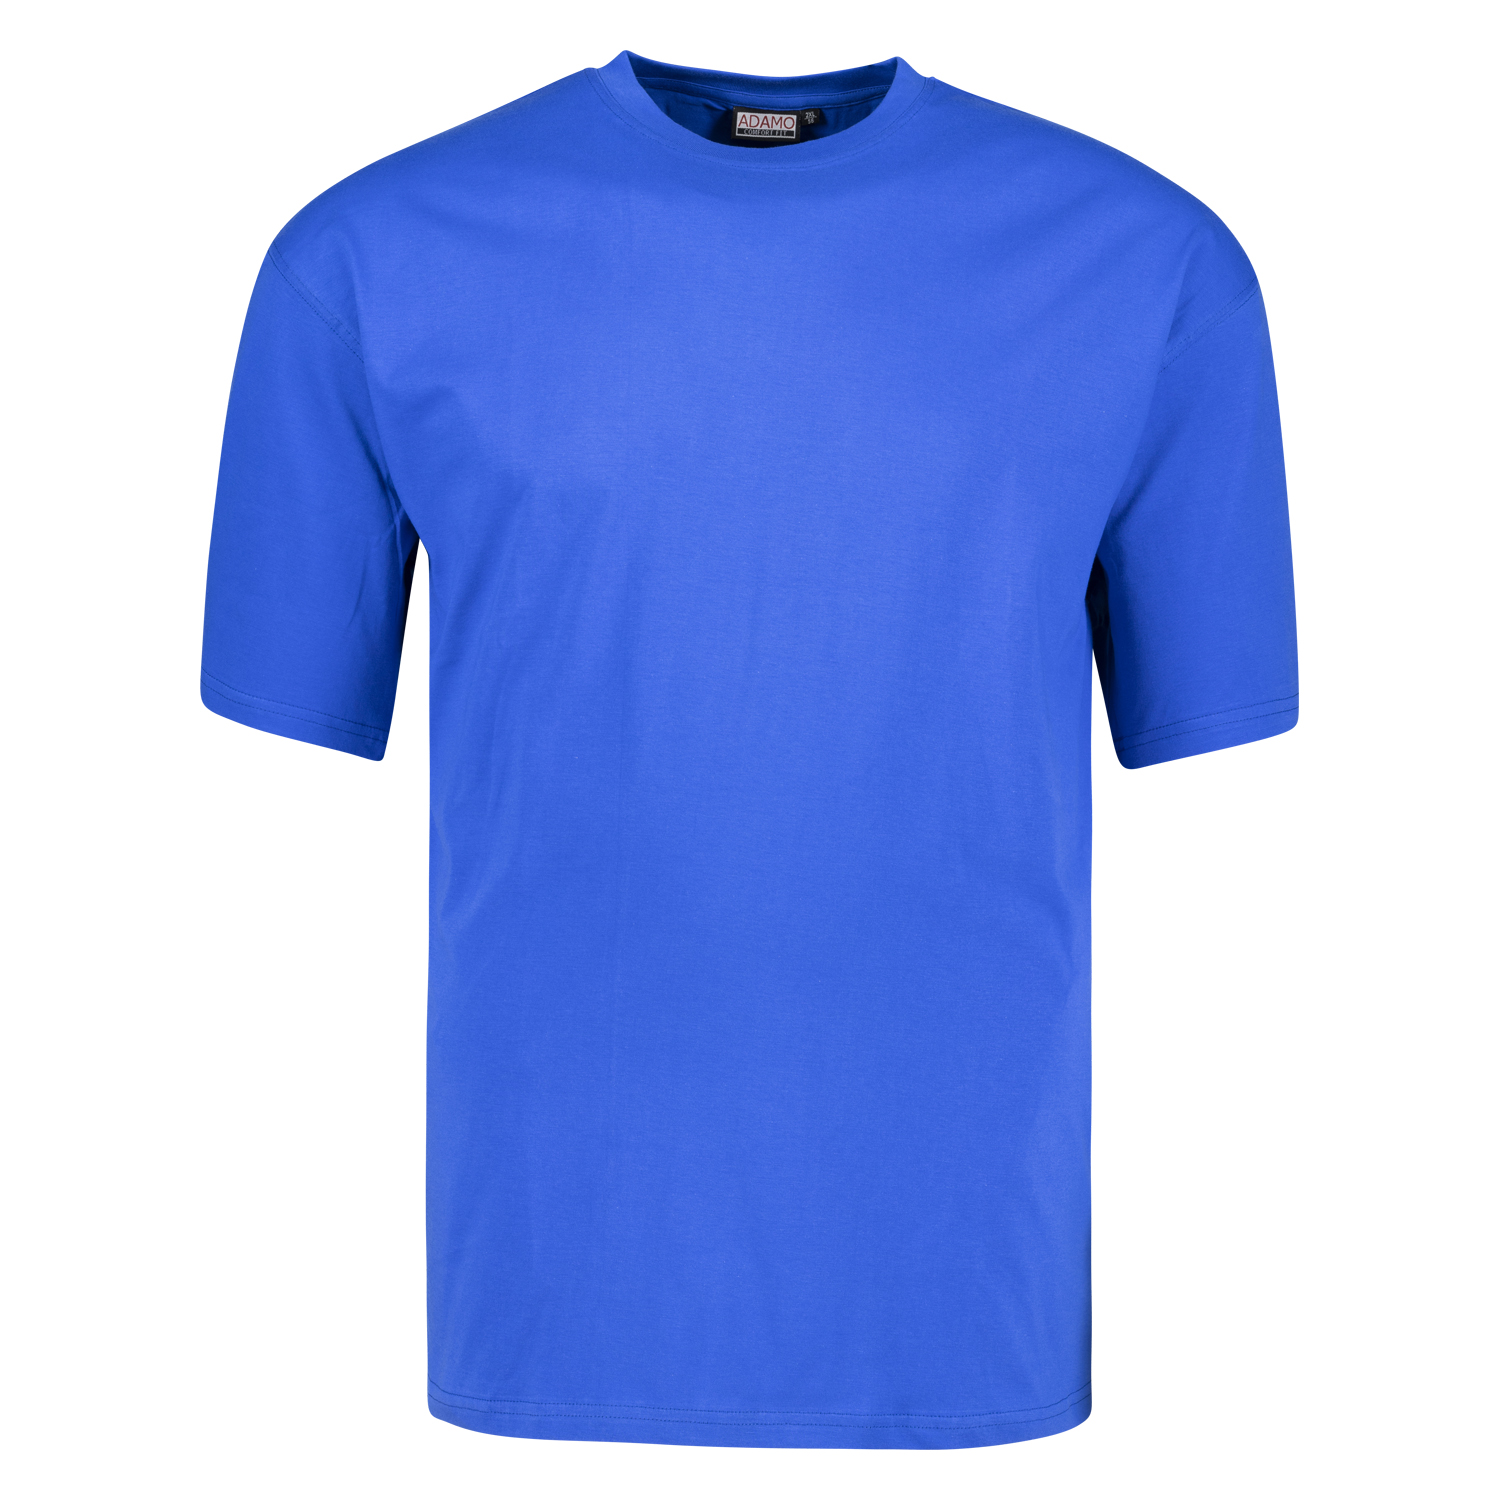 T-shirts in royal blue series Marlon COMFORT FIT by Adamo up to oversize 12XL - double pack